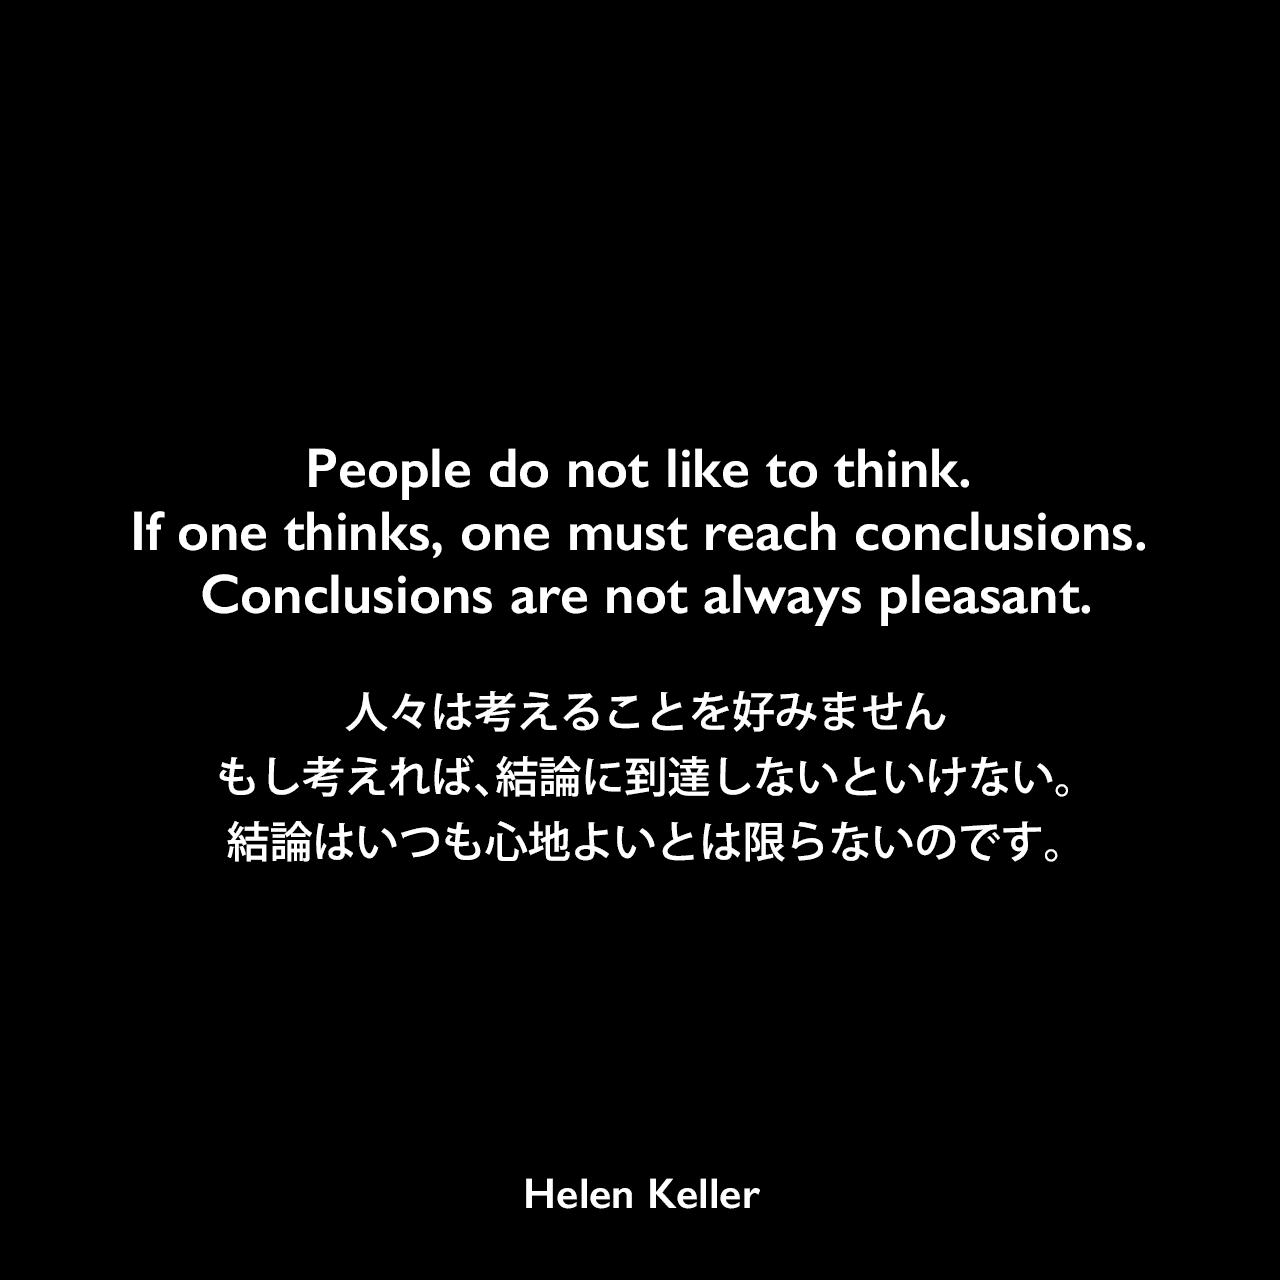 People do not like to think. If one thinks, one must reach conclusions. Conclusions are not always pleasant.人々は考えることを好みません、もし考えれば、結論に到達しないといけない。結論はいつも心地よいとは限らないのです。- ヘレン・ケラーの本「Helen Keller, her Socialist years」よりHelen Keller